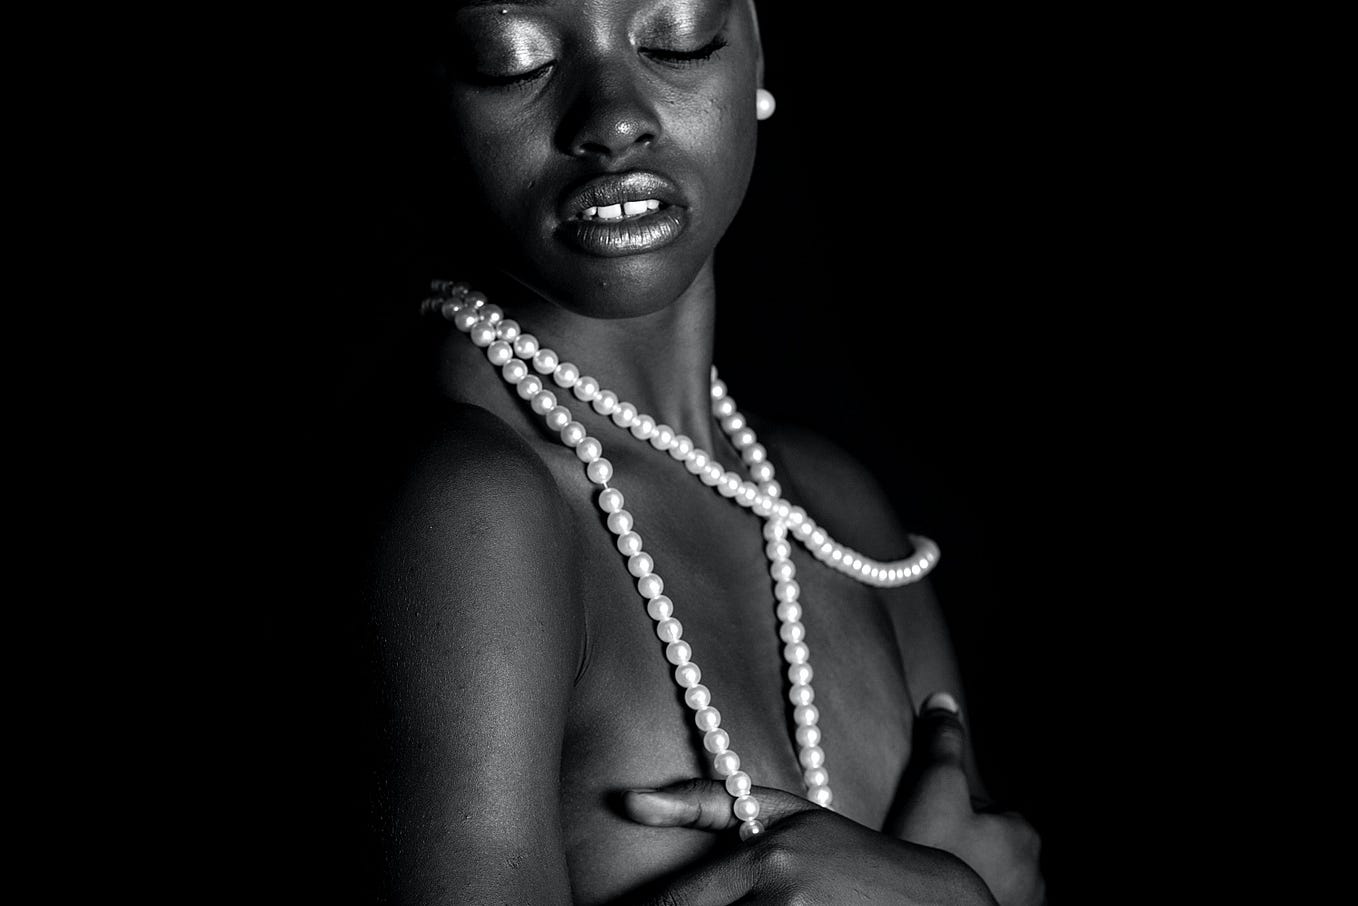 A beautiful woman of colour wearing pearls